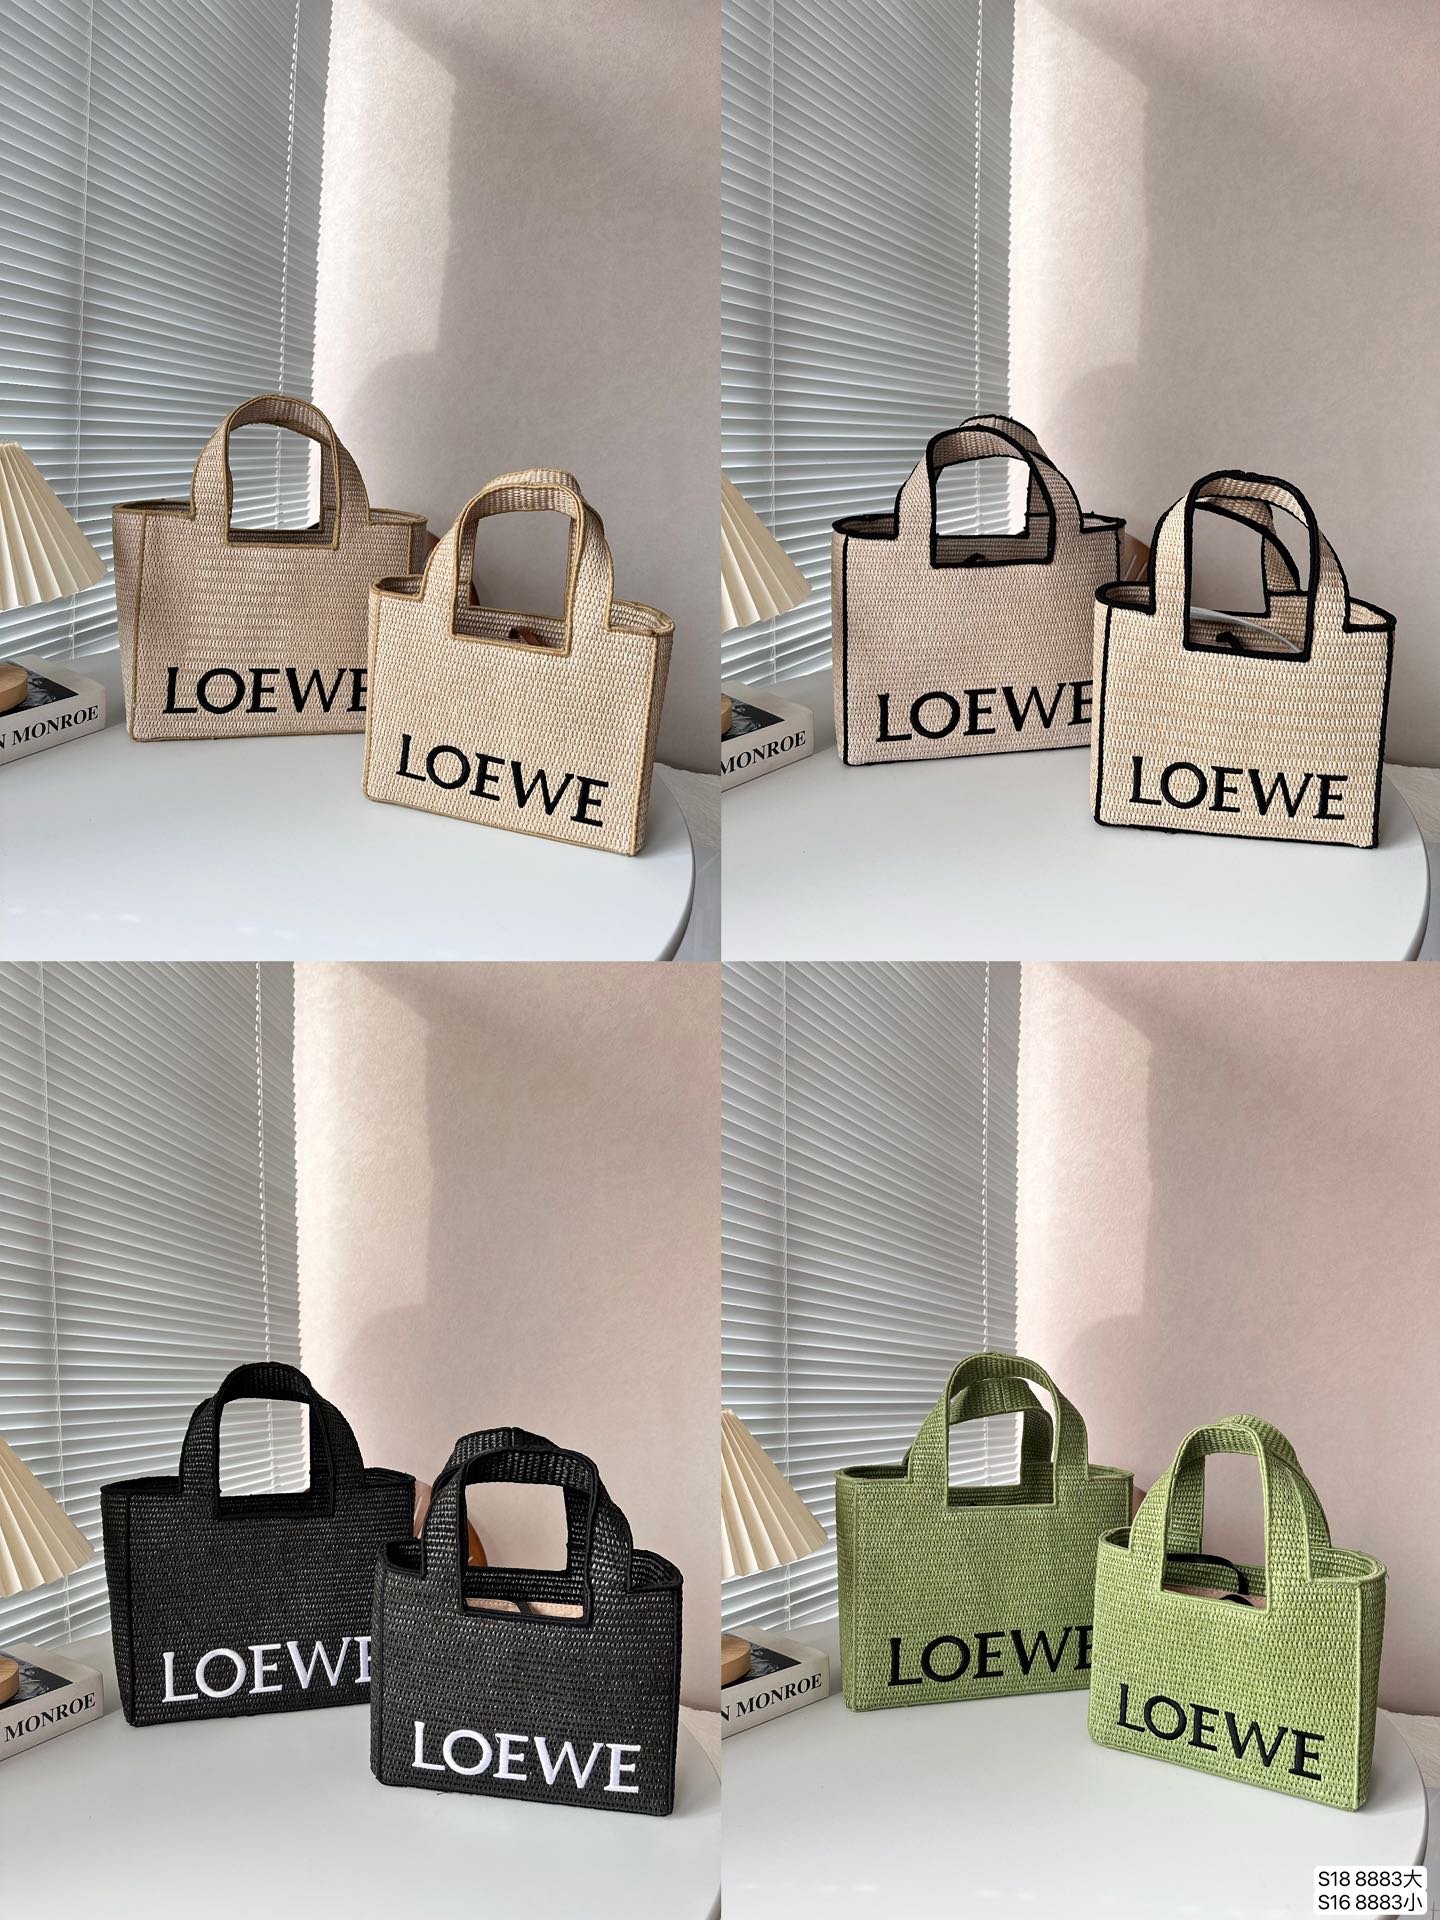 Loewe Tote Bags Weave Straw Woven Summer Collection